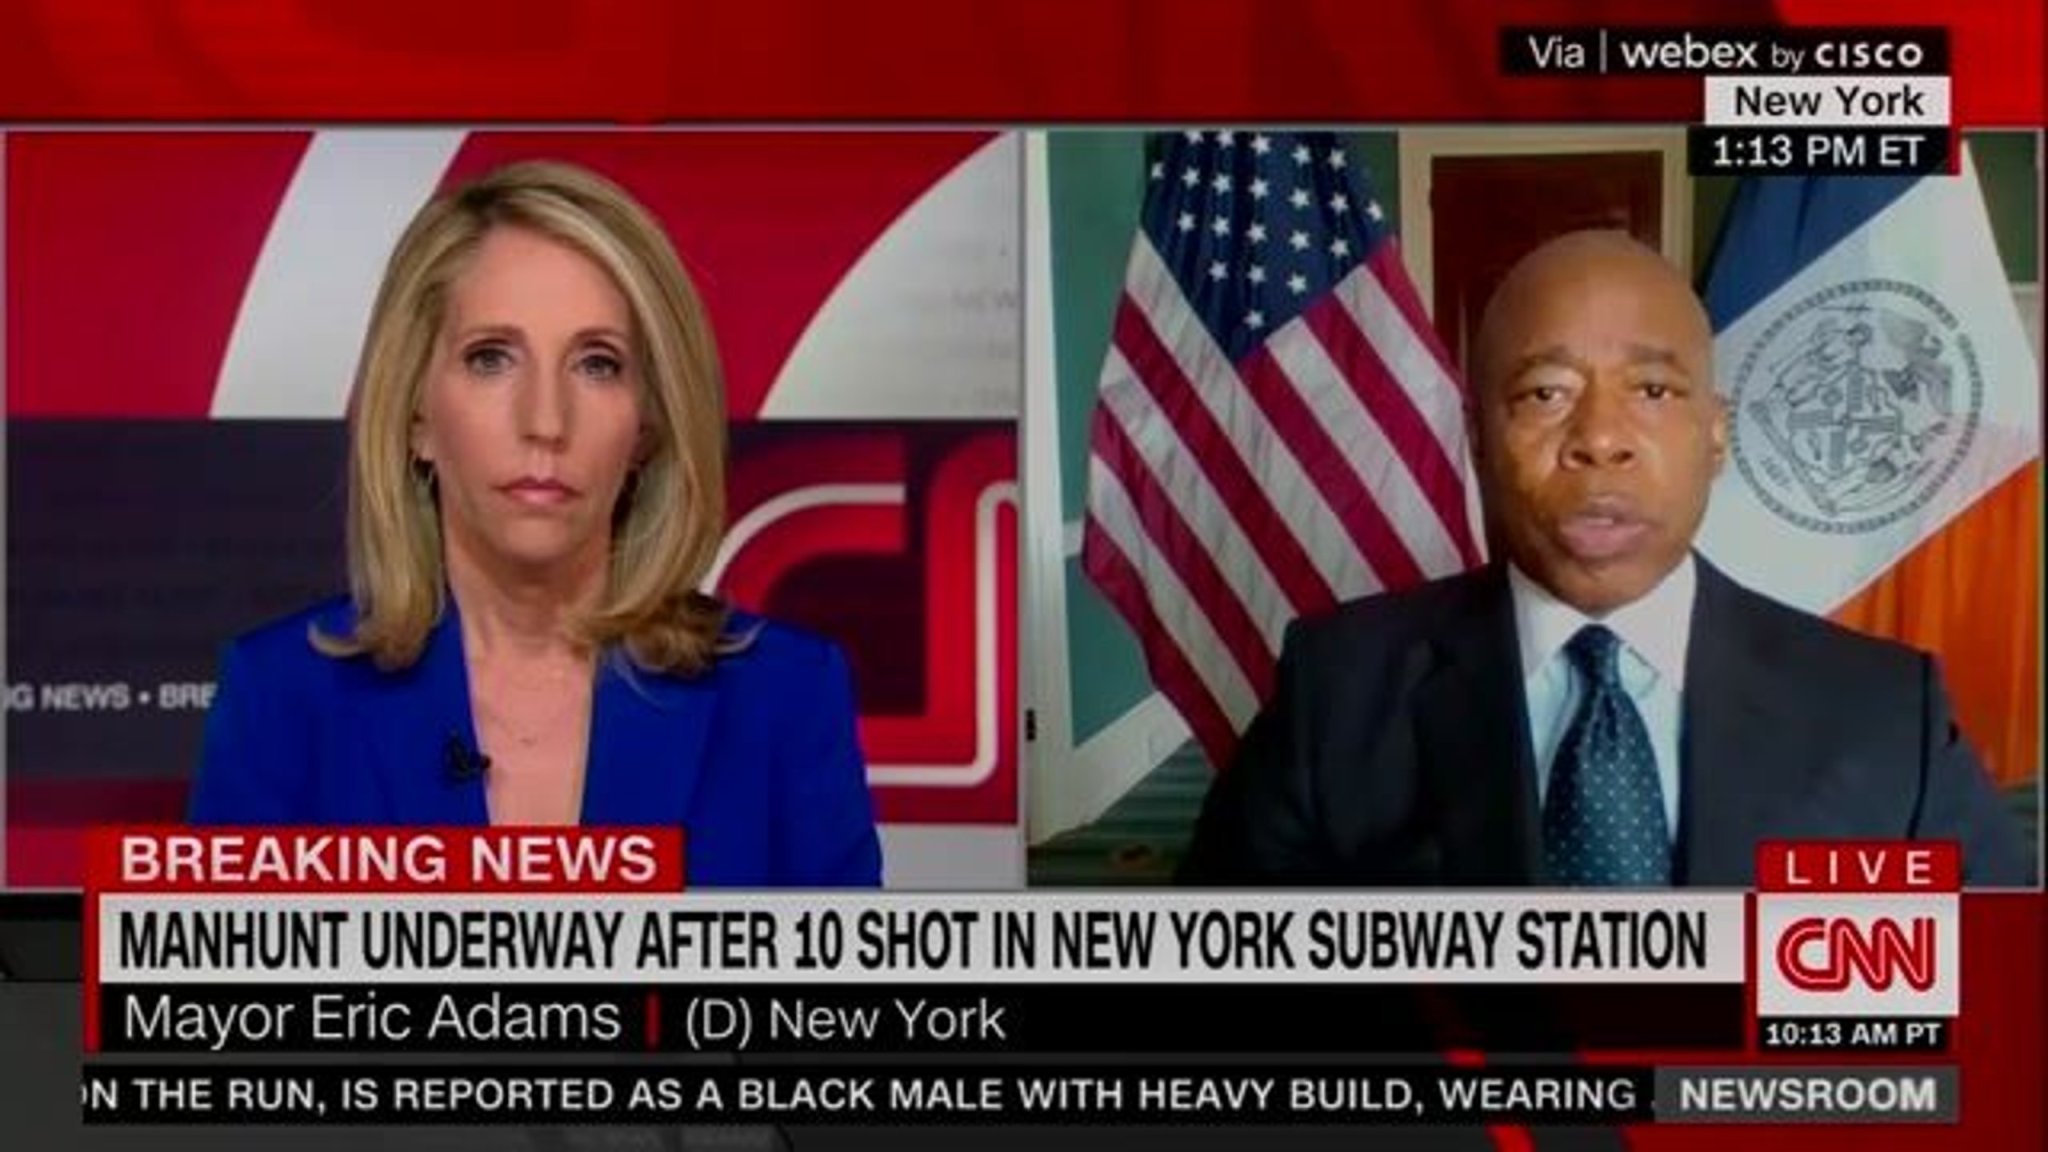 NY Mayor Adams (D) to New Yorkers in wake of attacks: "I call on New Yorkers to be as resilient as we have often been."